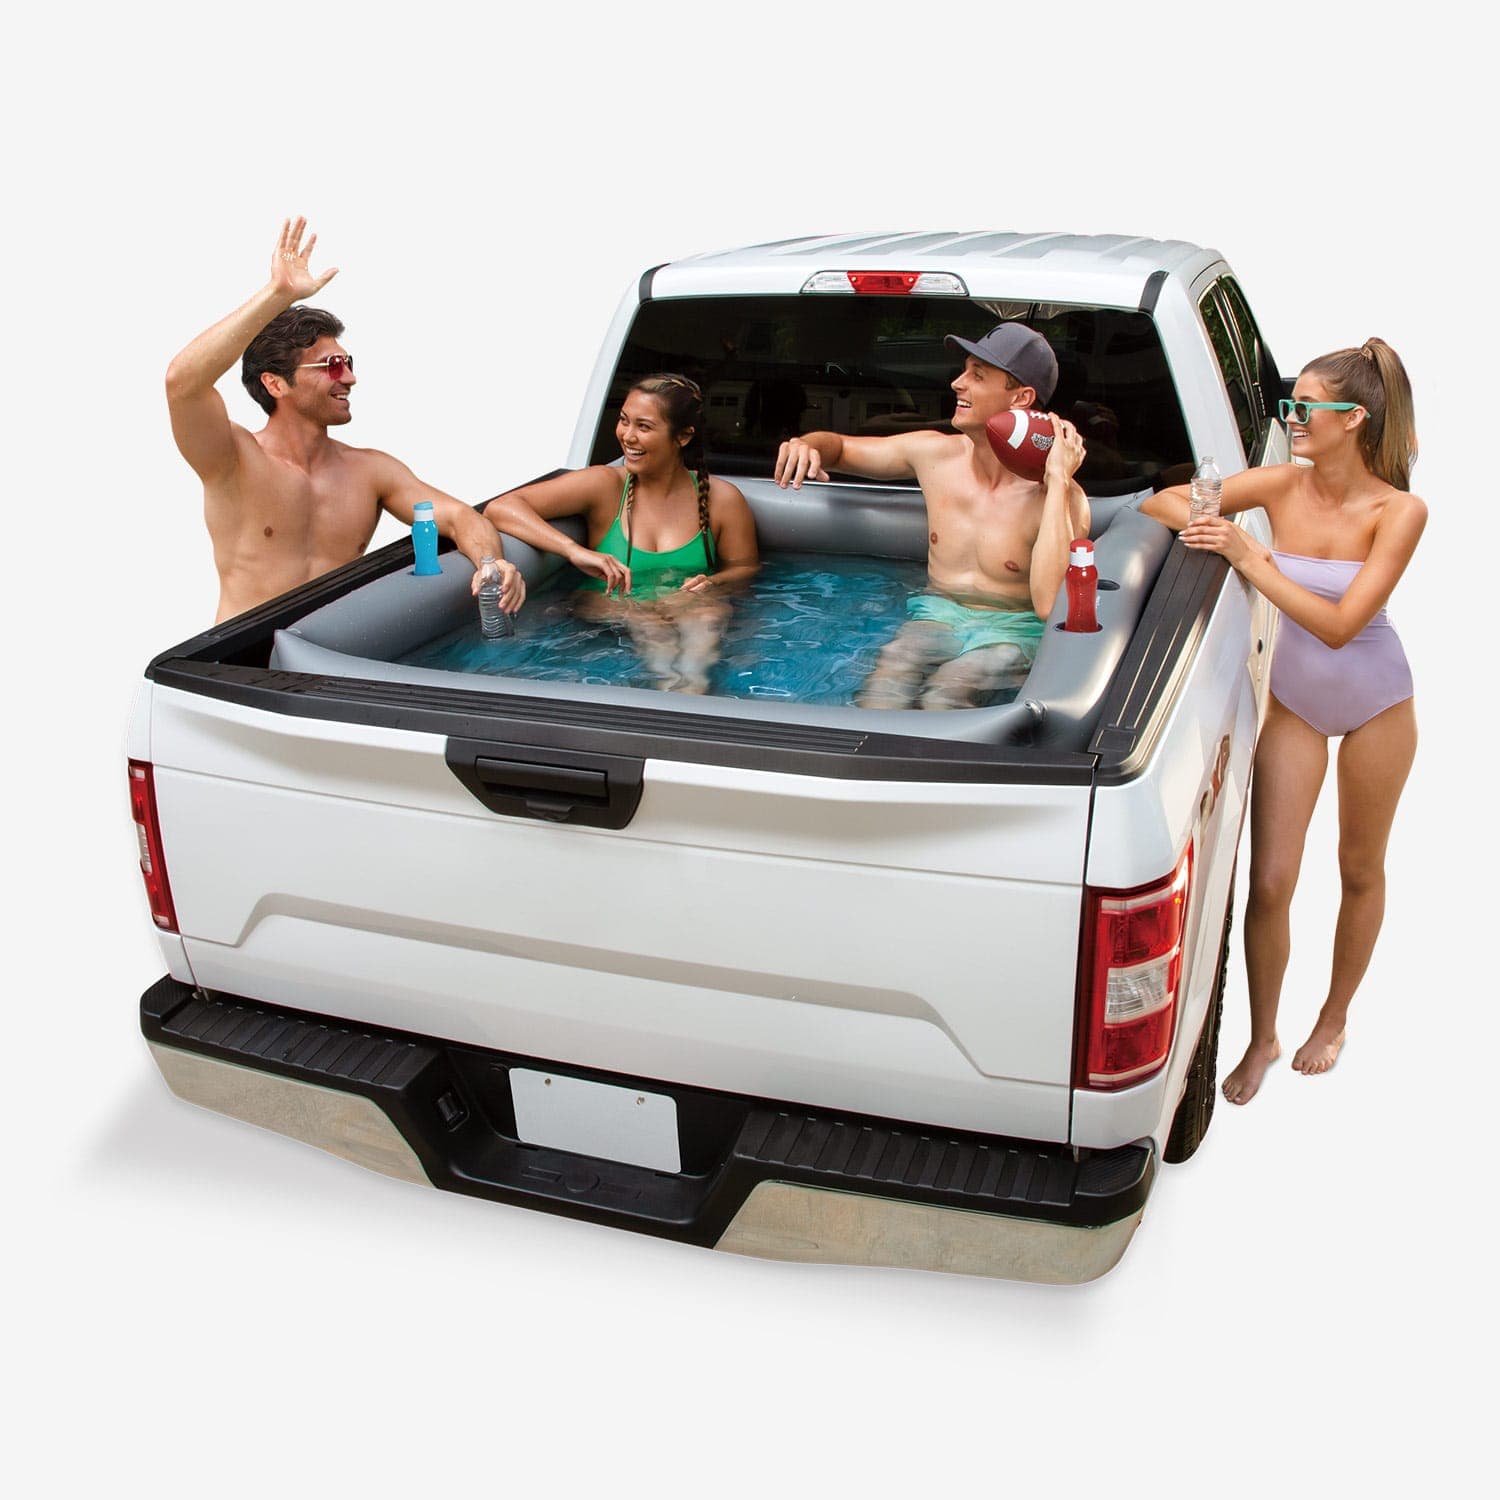 Funsicle Truck Bed Pool inside a truck with people on a white background